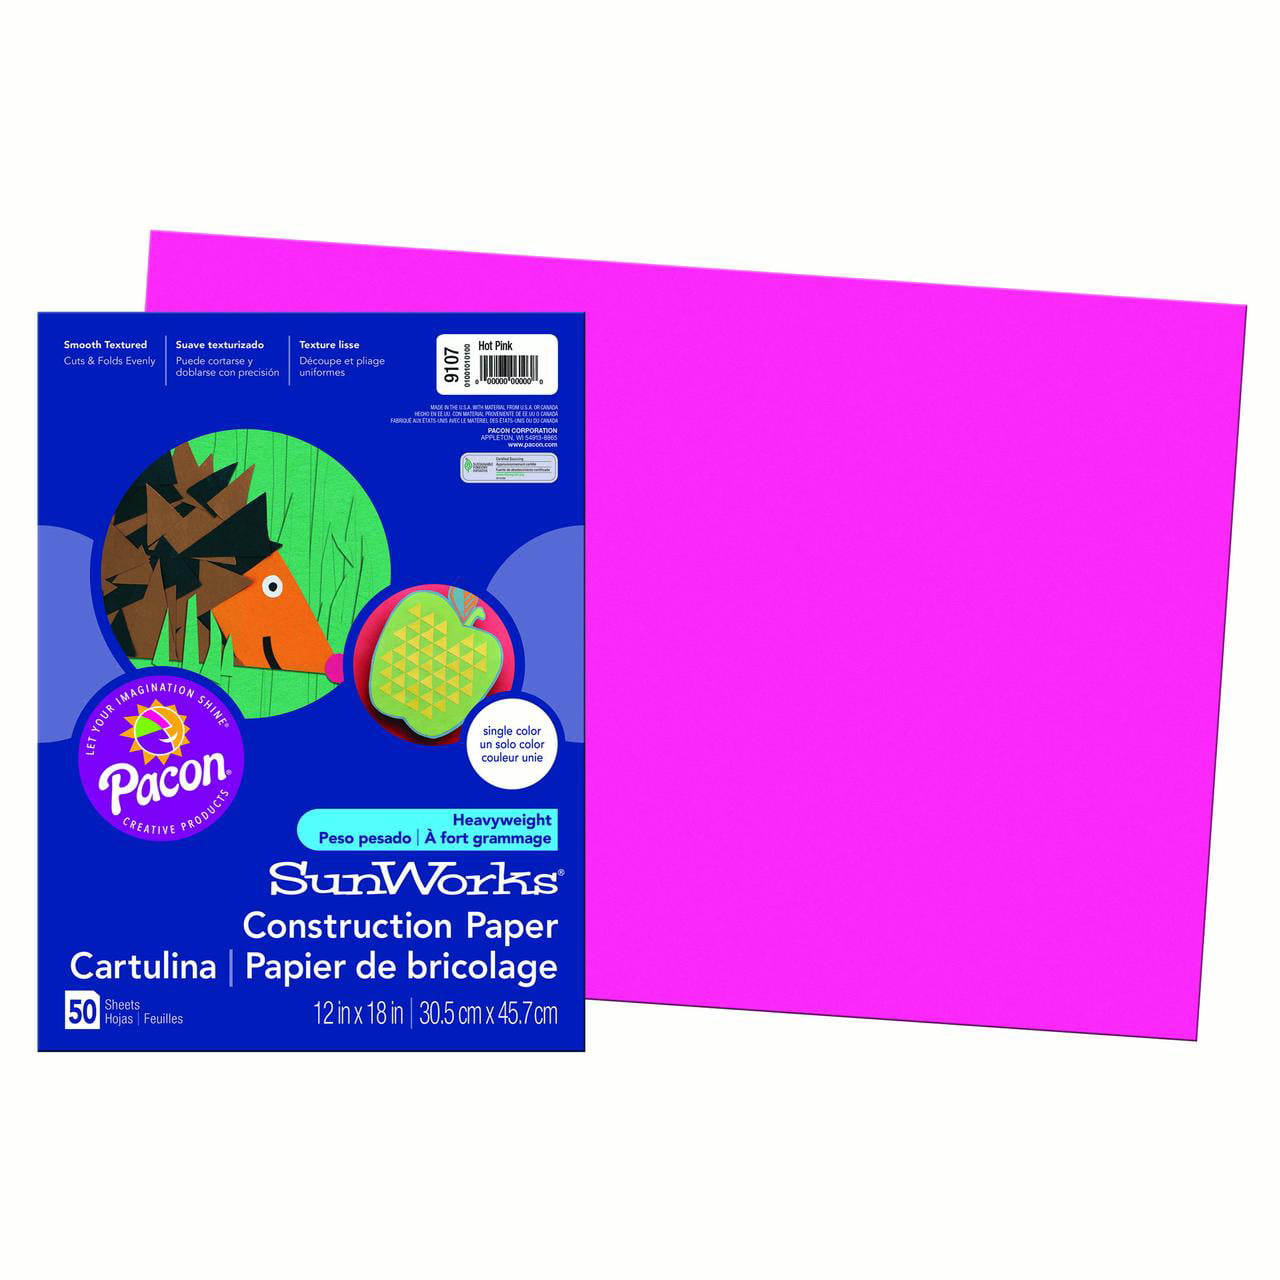 Pacon Sunworks Construction Paper (Pink) - 12 In. x 18 In.